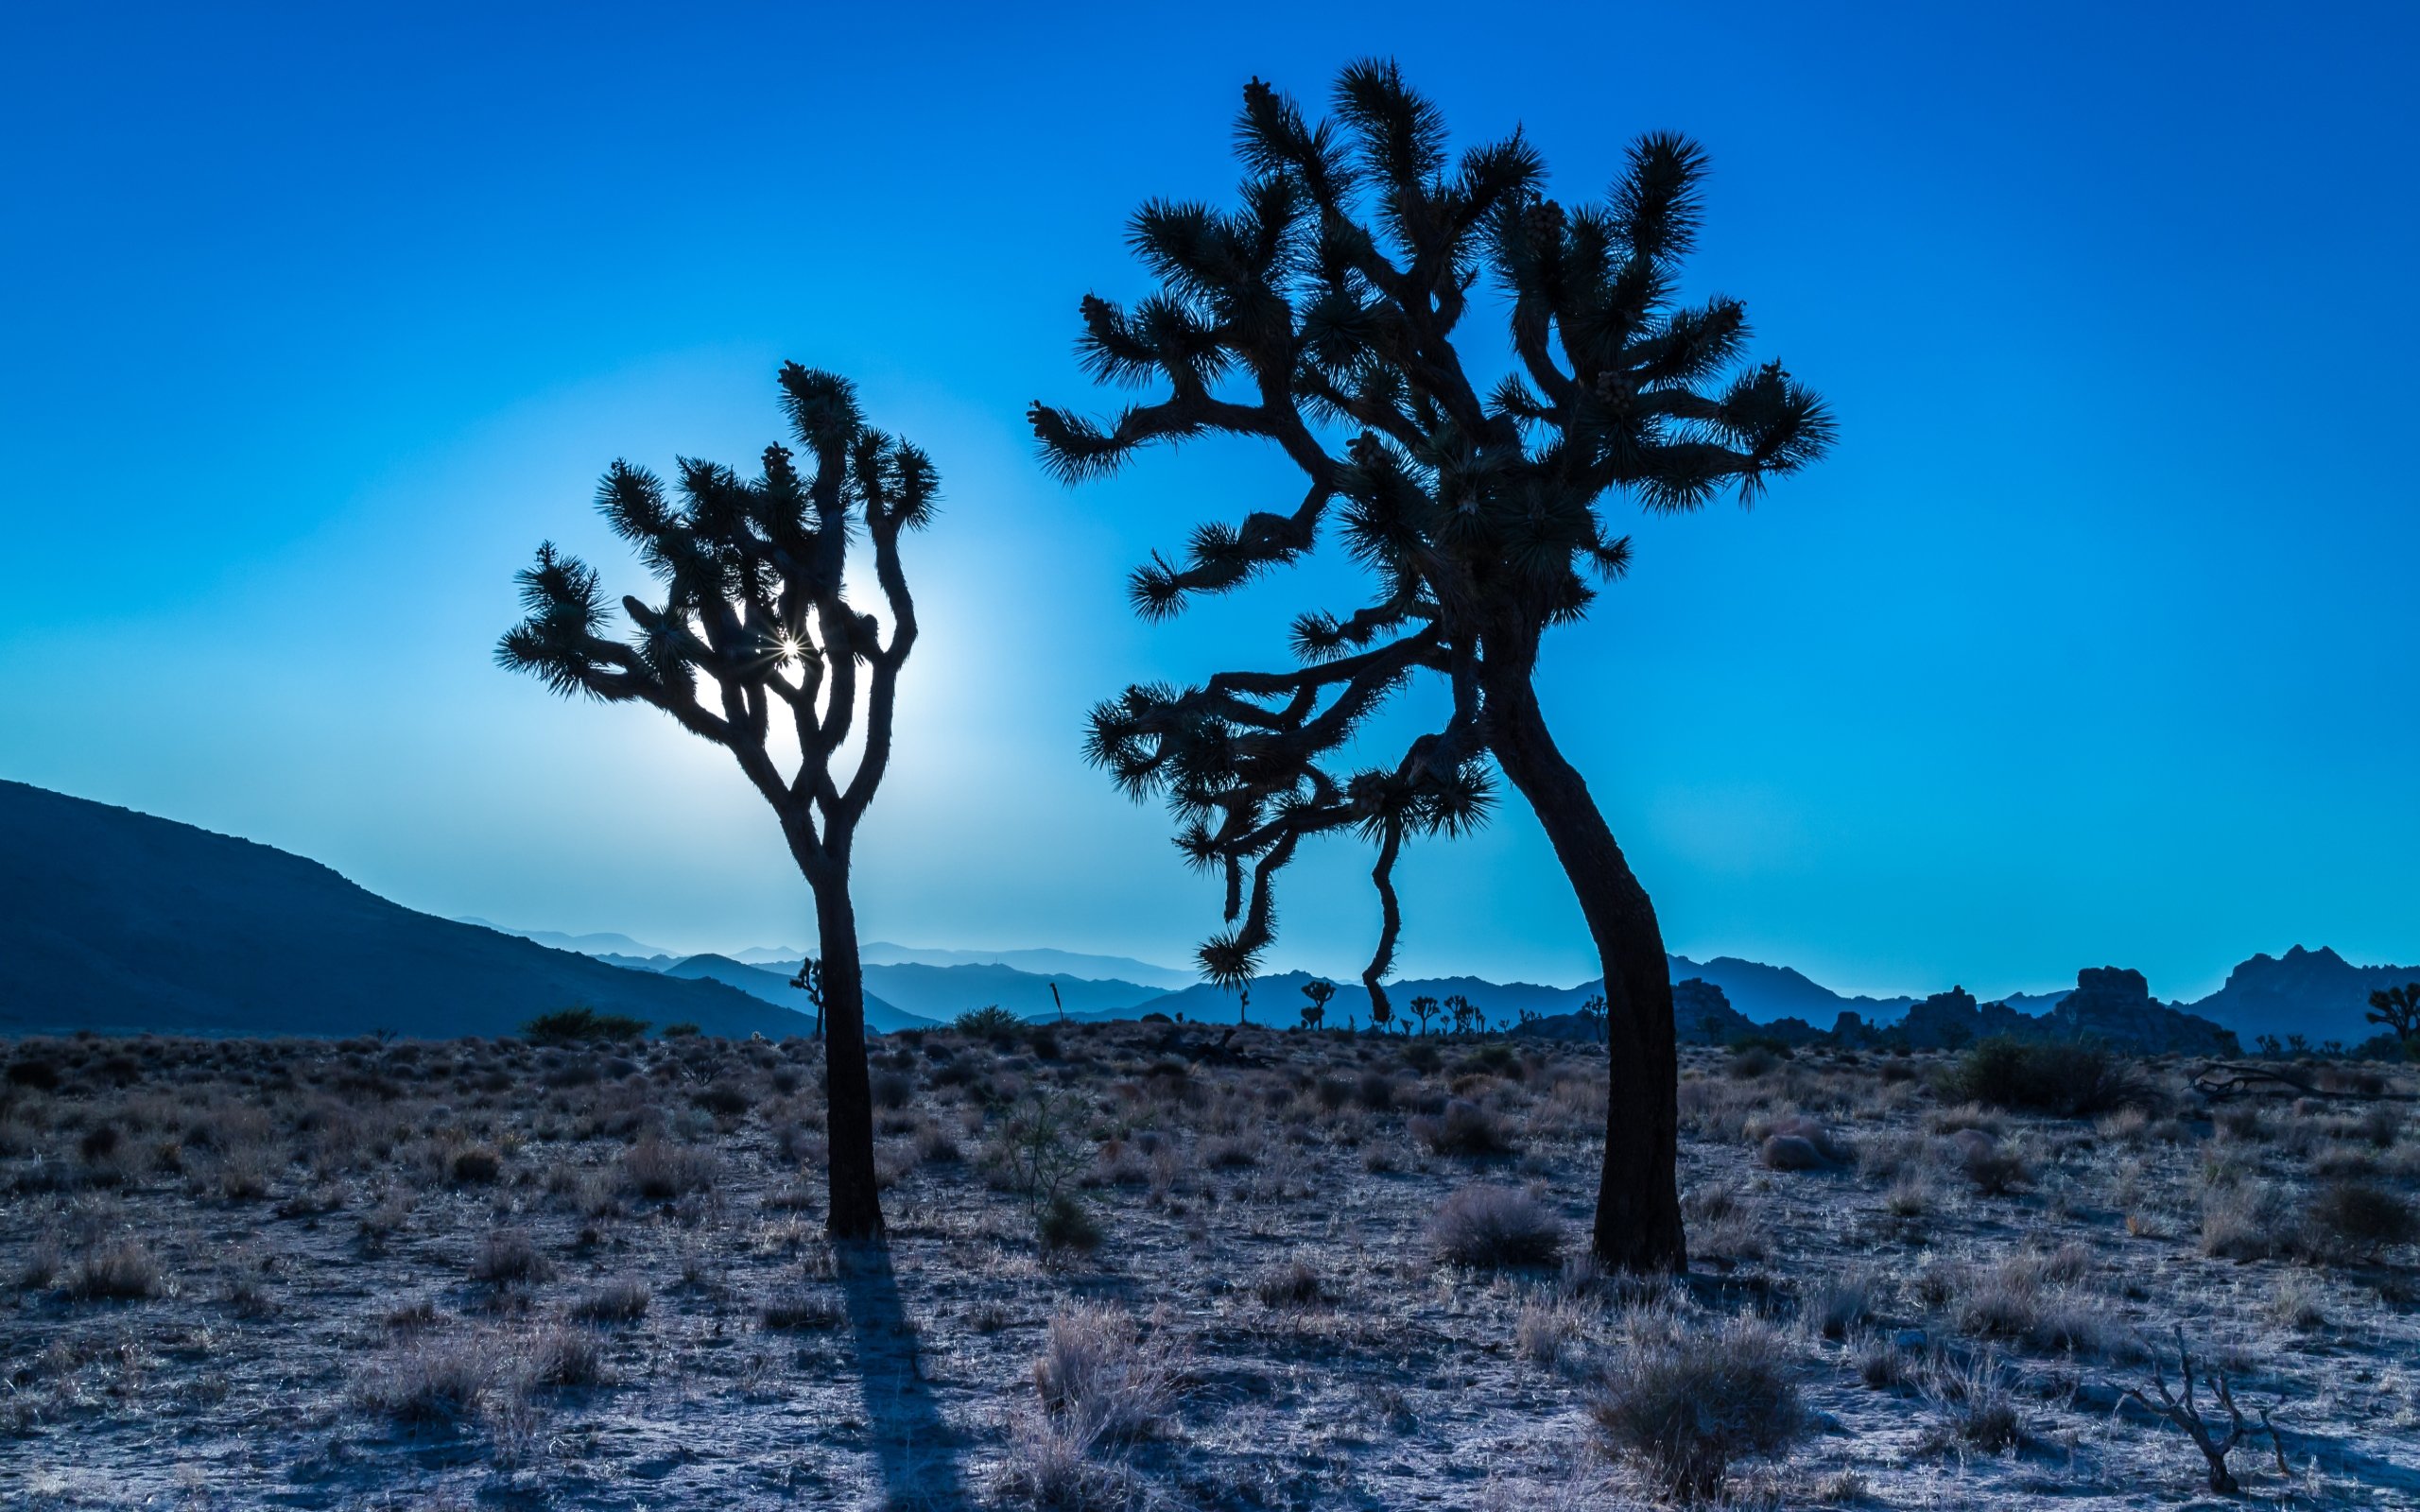 Download hd 2560x1600 Joshua Tree National Park PC background ID:254689 for free